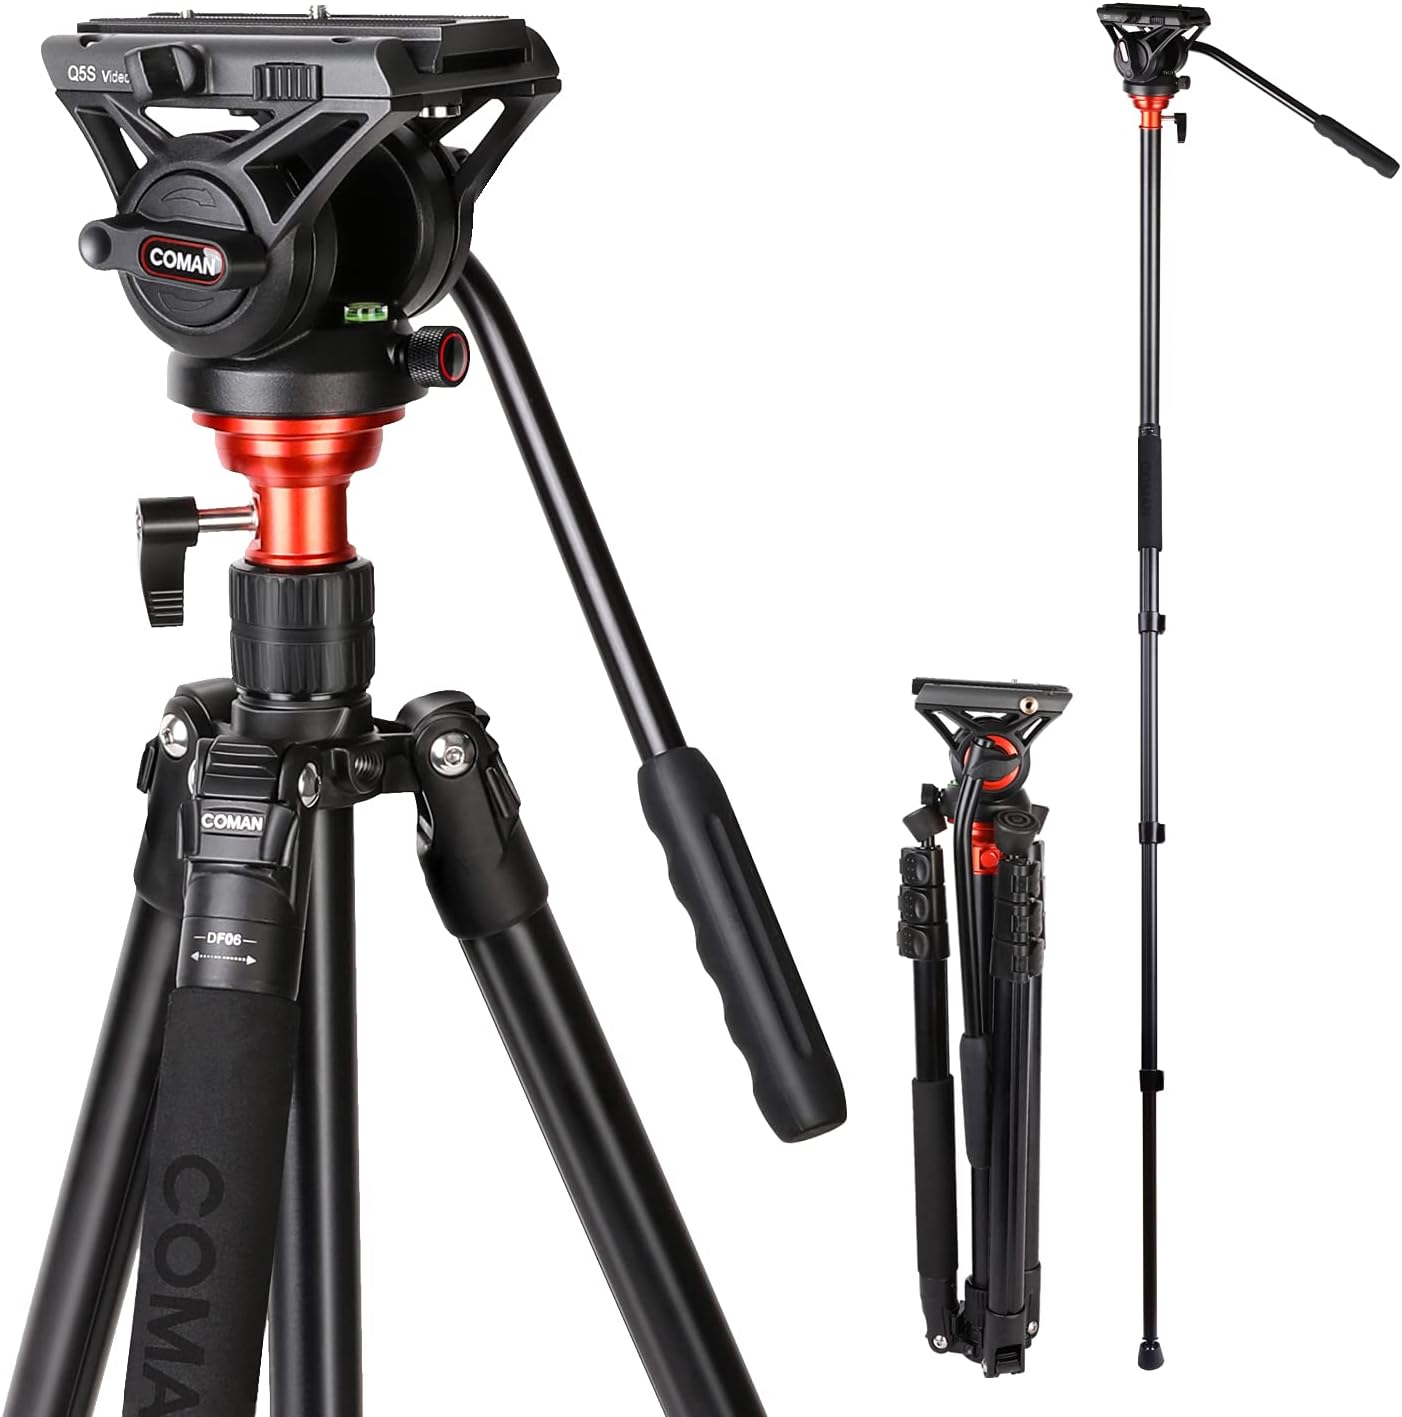 Understanding Tripod Load Capacity and Weight Limits